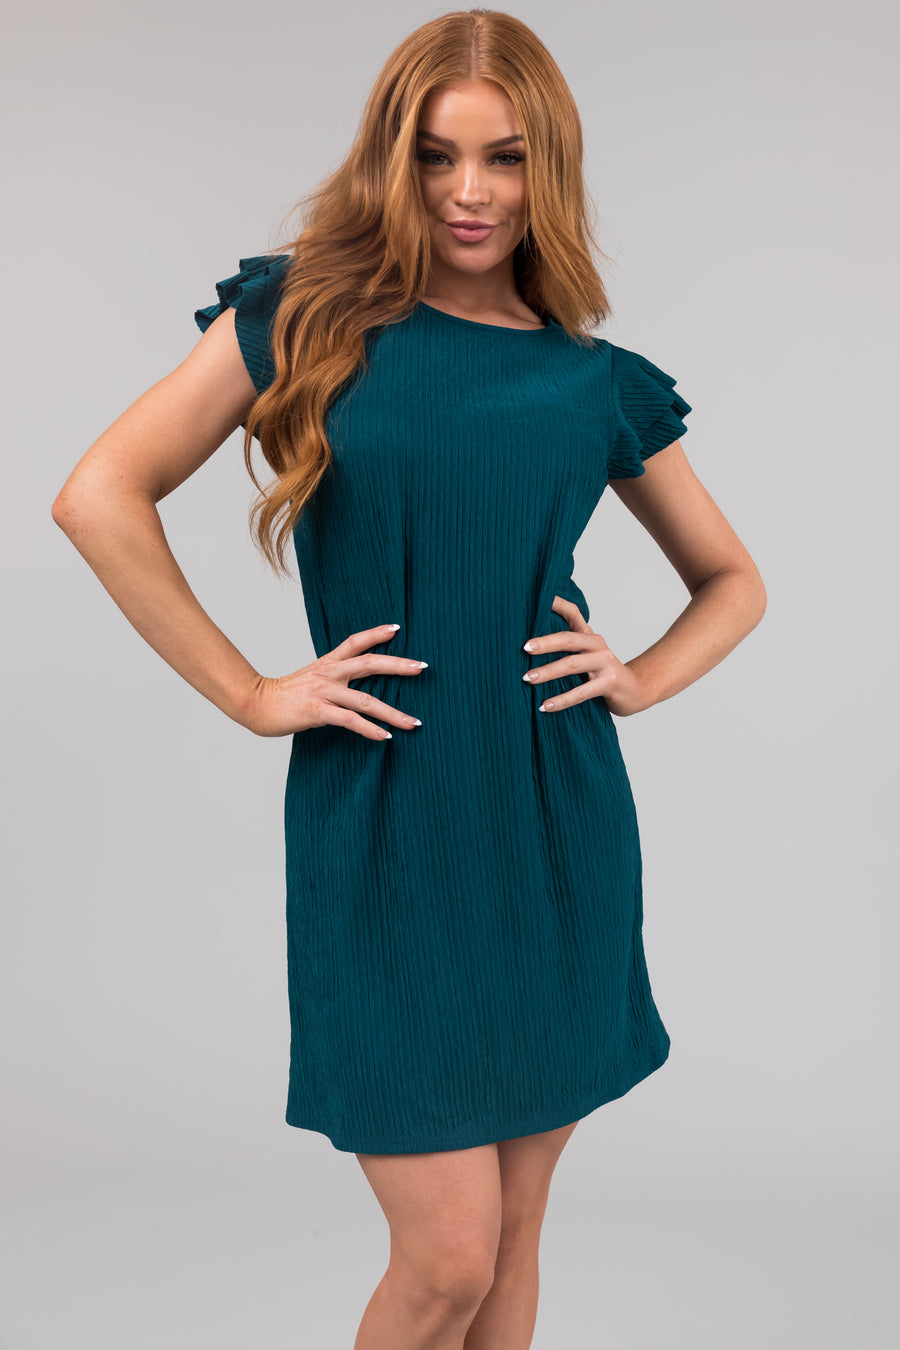 Lily Teal Frill Textured Shift Dress